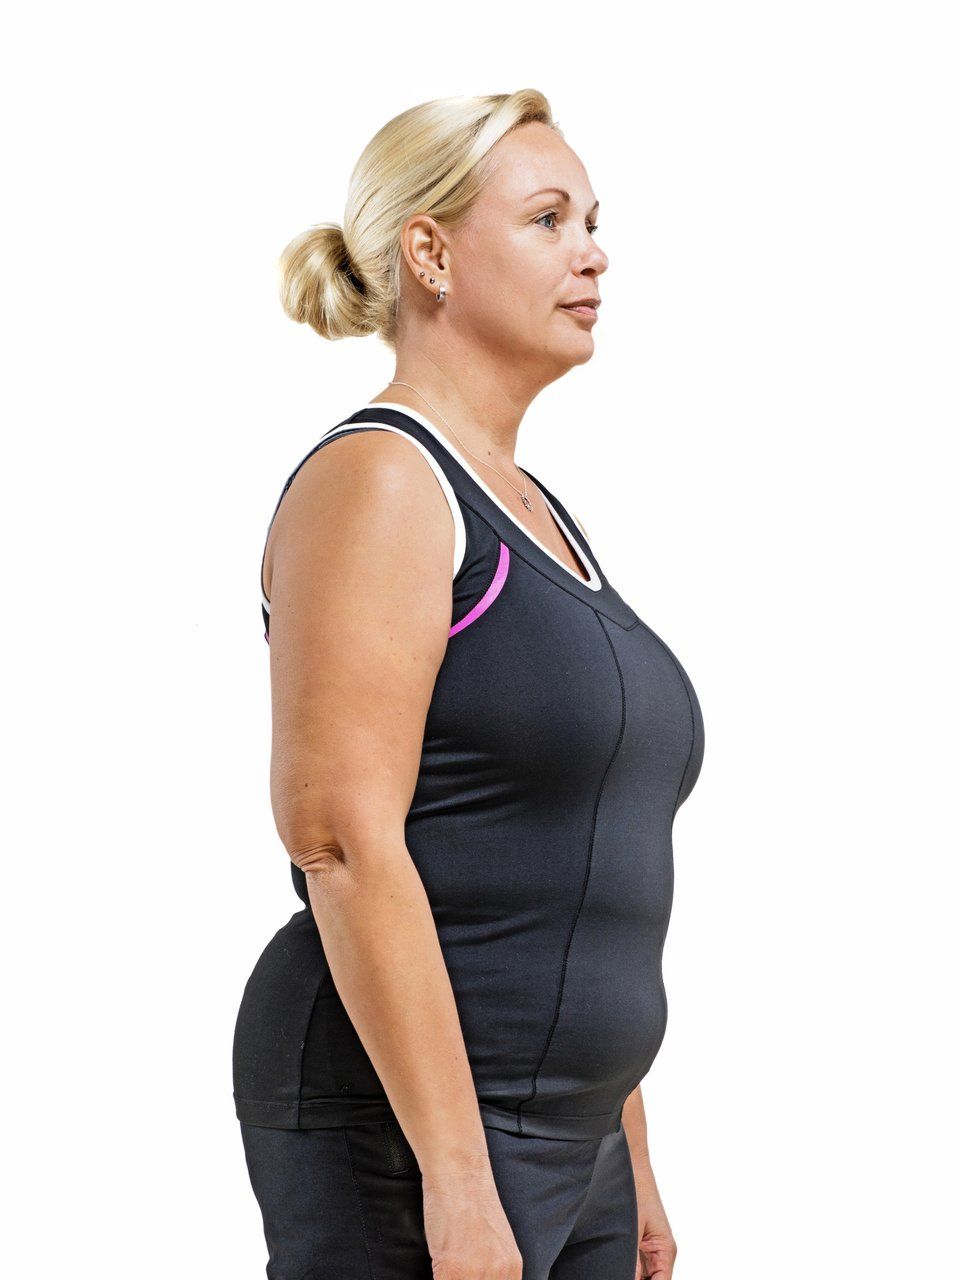 a woman in a black tank top is standing in front of a white background